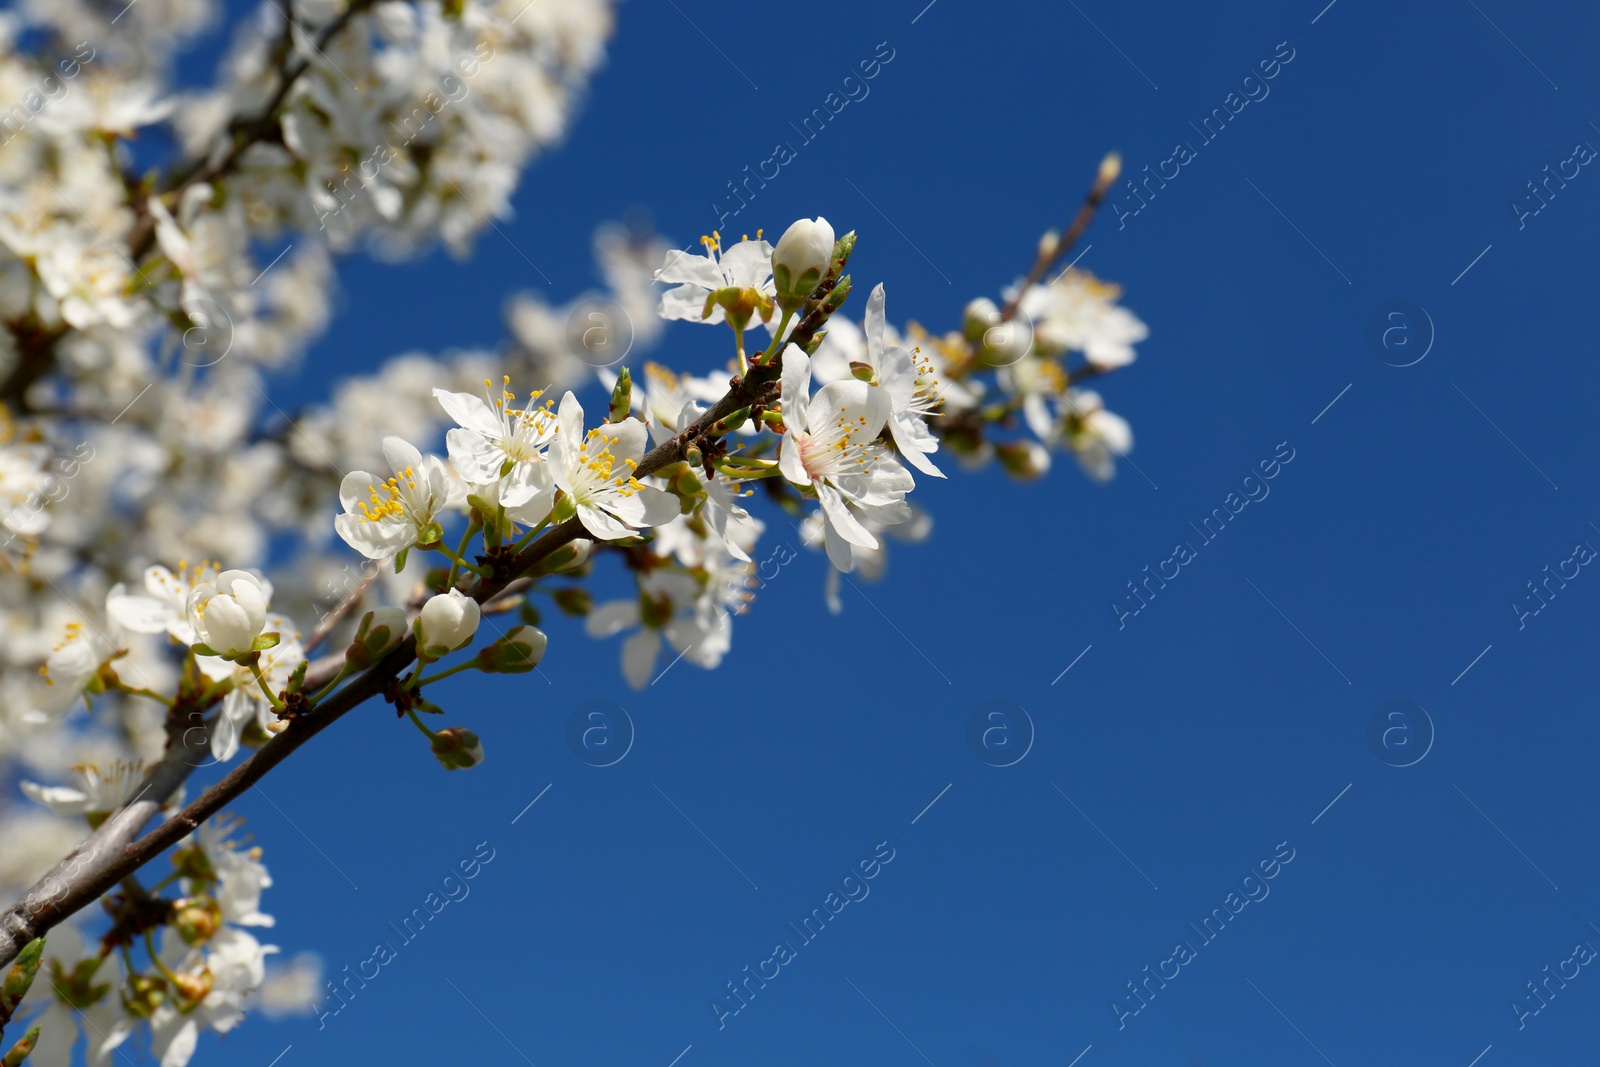 Photo of Branch of cherry tree with beautiful white blossoms against blue sky